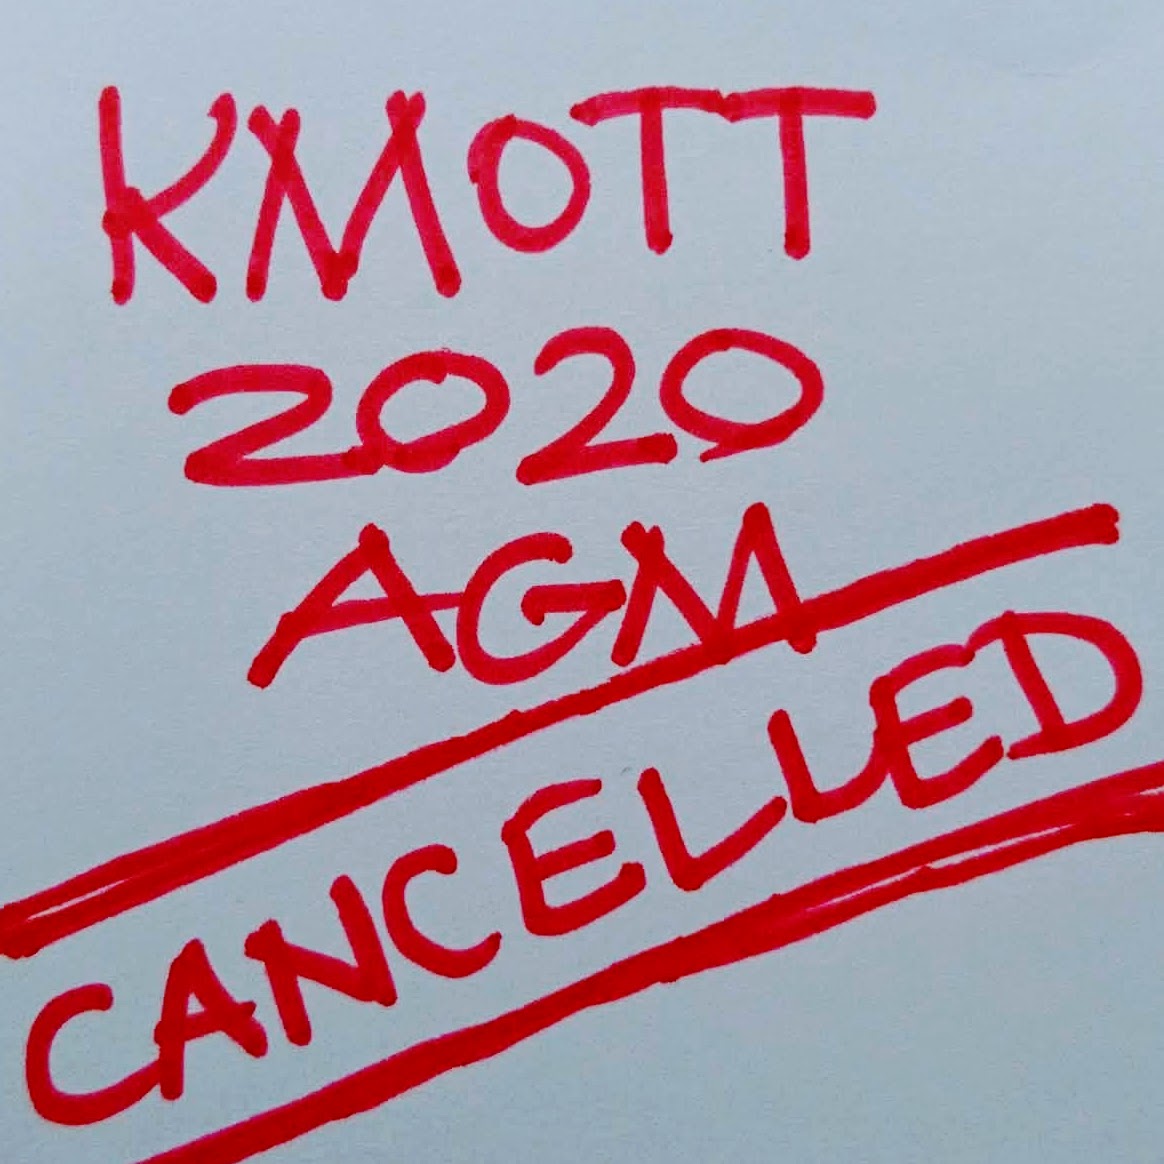 KMOTT 2020 Annual General Meeting CANCELLED